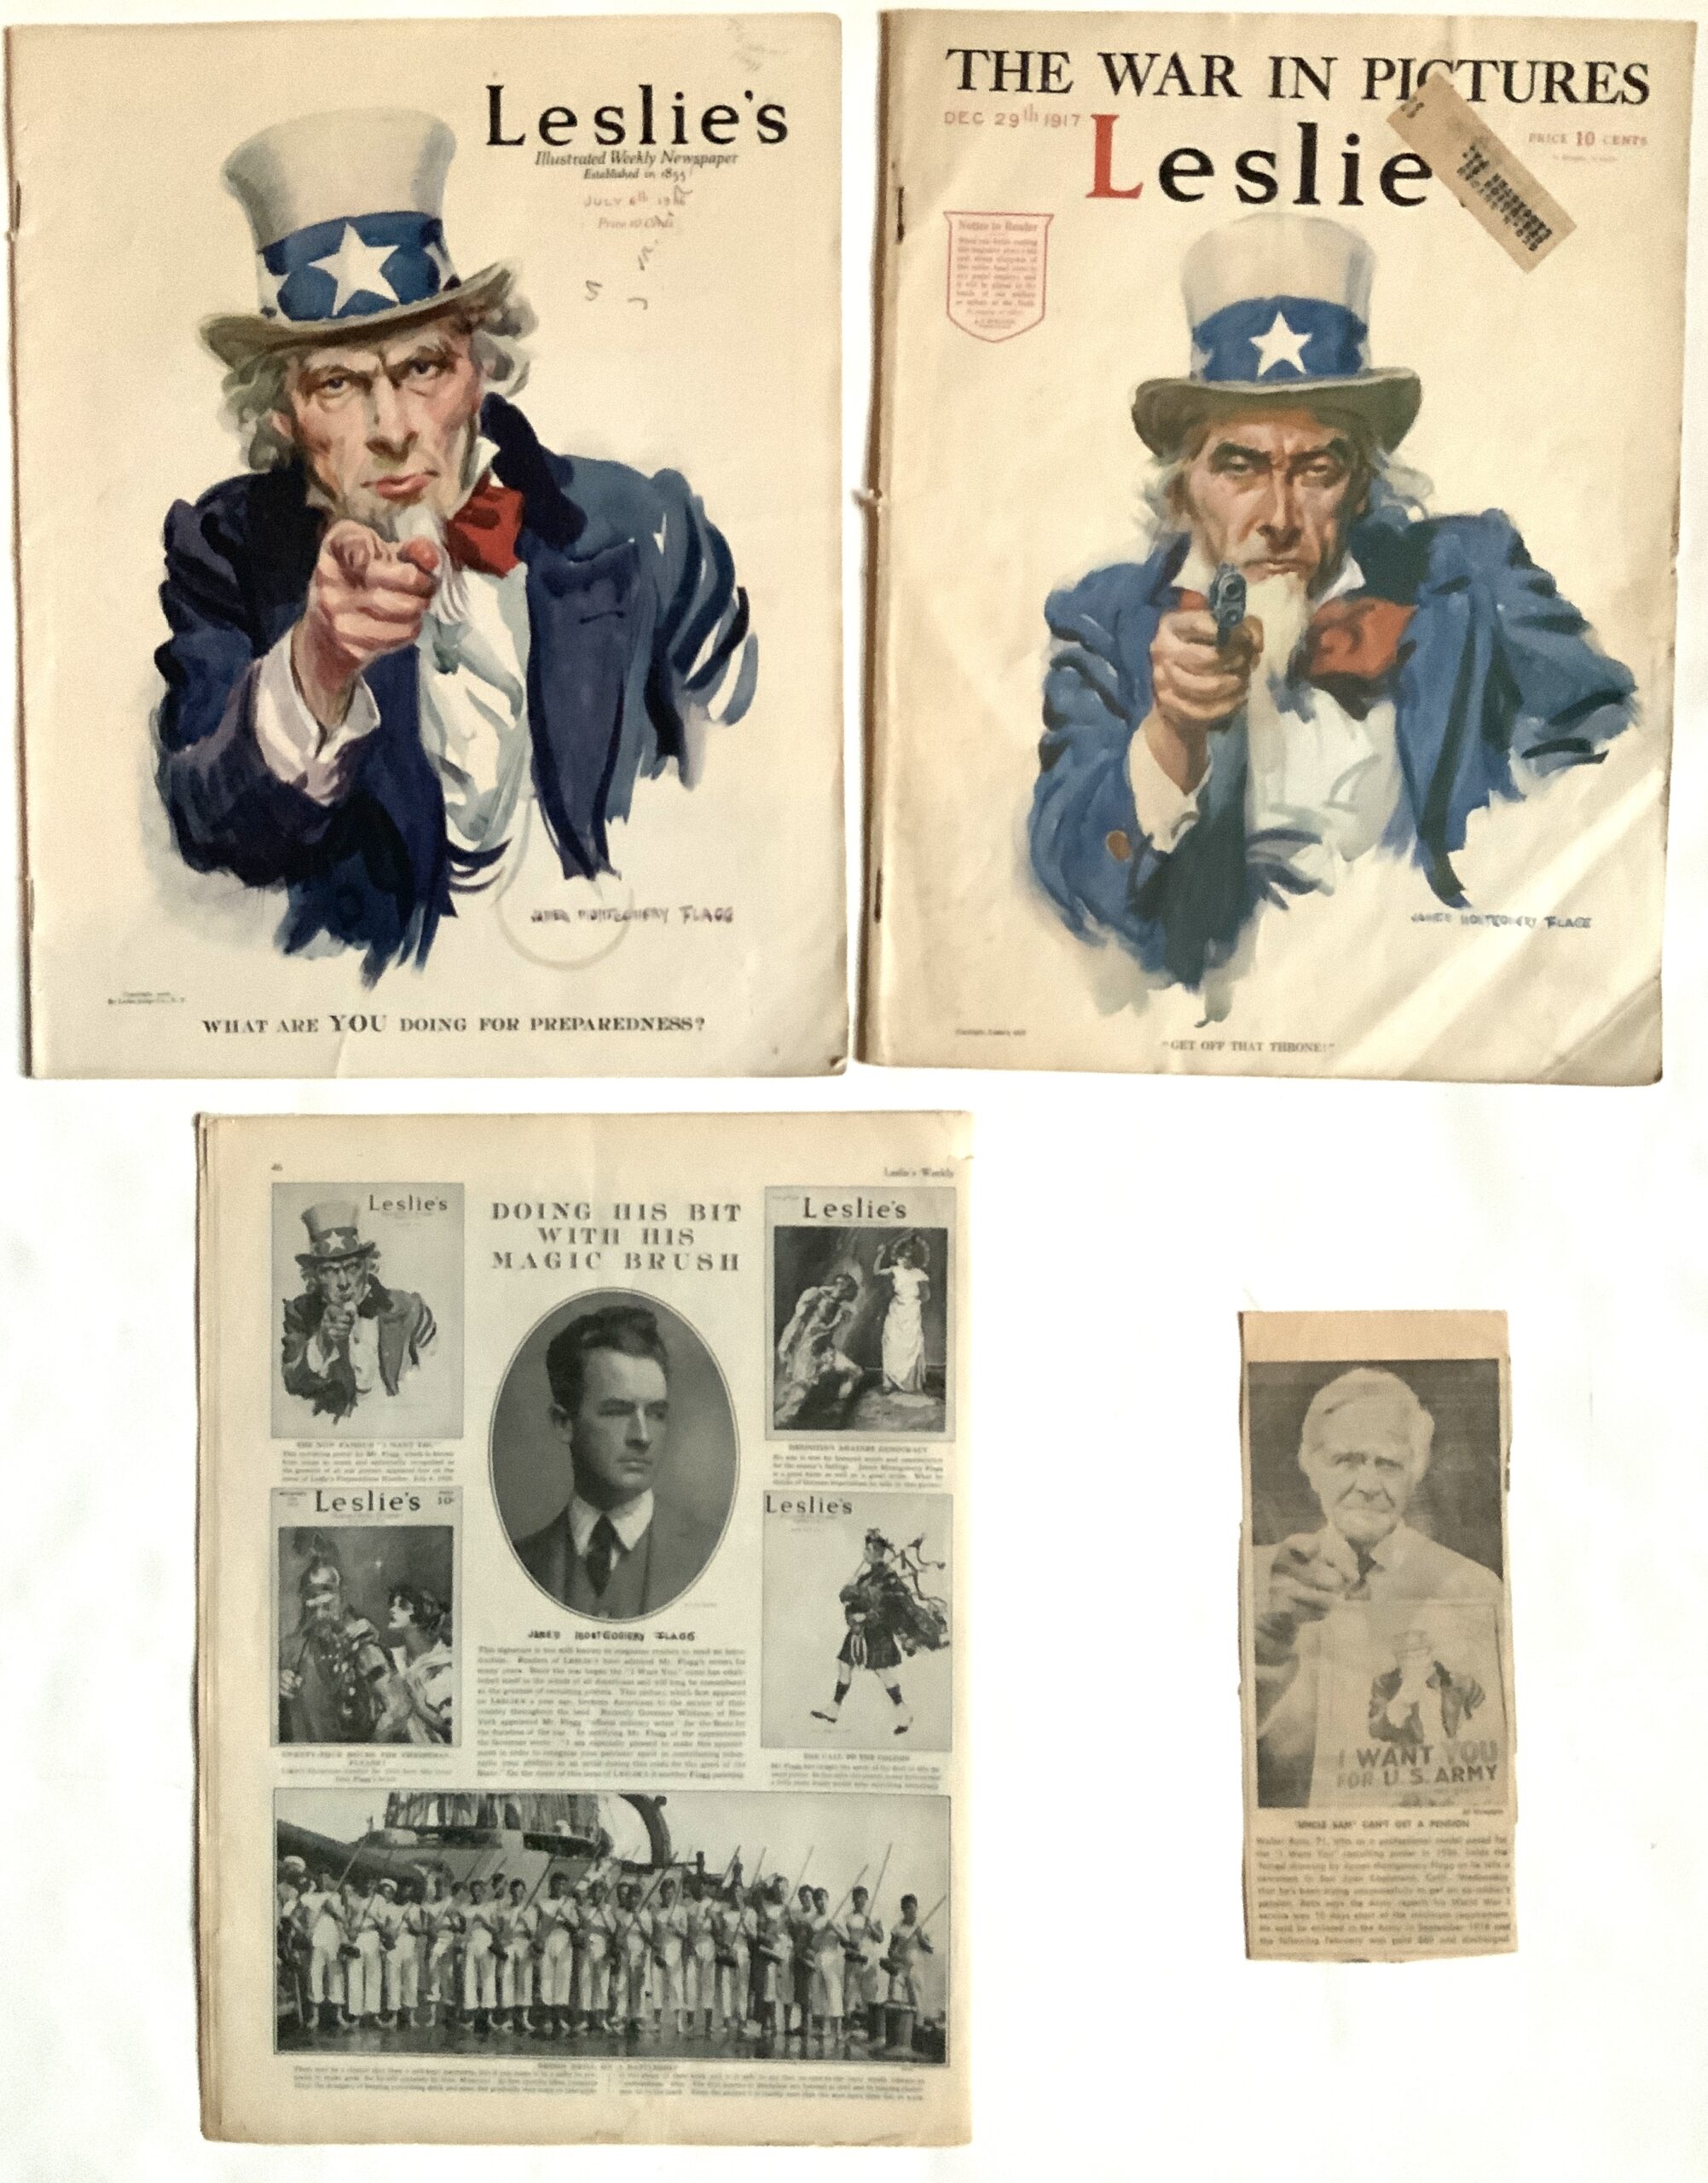 M484	LOT OF FOUR: 2 DIFFERENT COPIES OF LESLIE’S WEEKLY FEATURING THE FAMOUS JAMES MONTGOMMERY FLAGG WWI IMAGE OF UNCLE SAM AND EPHEMERA